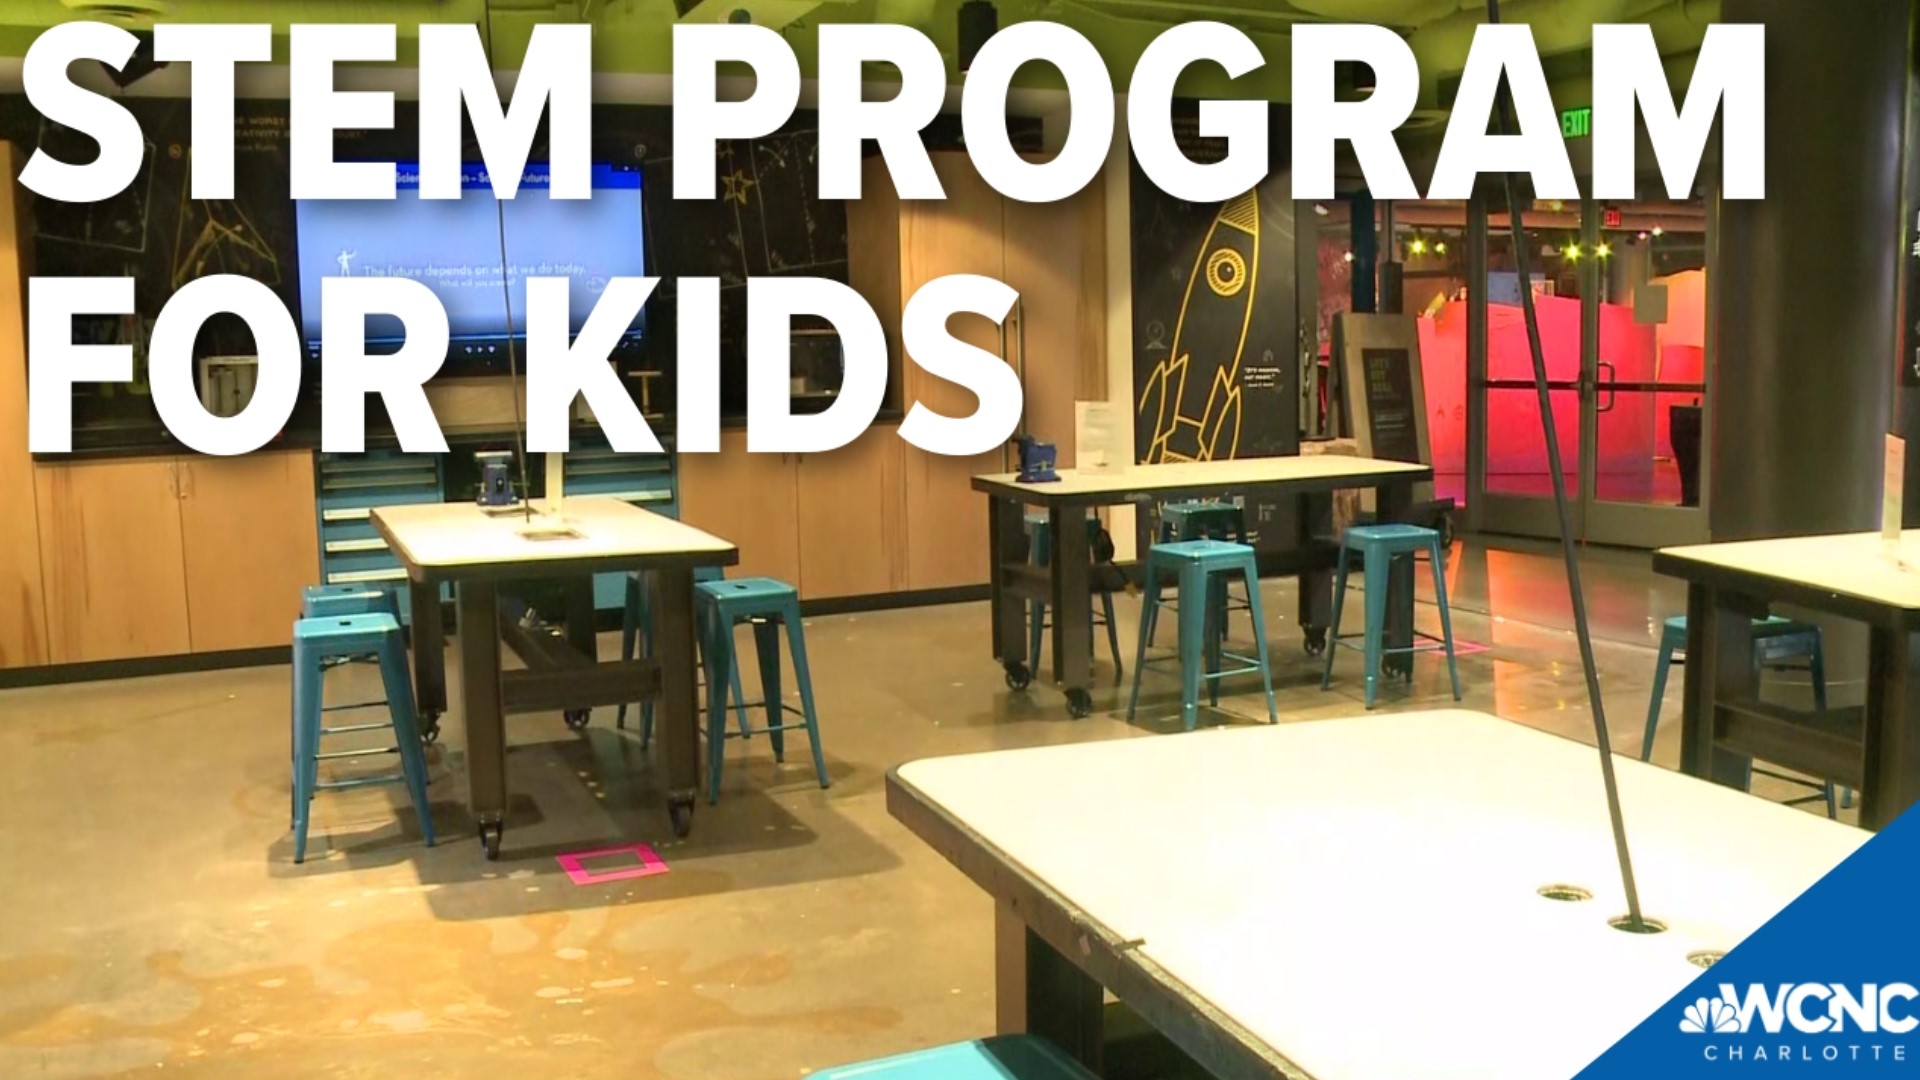 Discovery Place Science is kicking off a program to encourage kids to get excited about STEM.